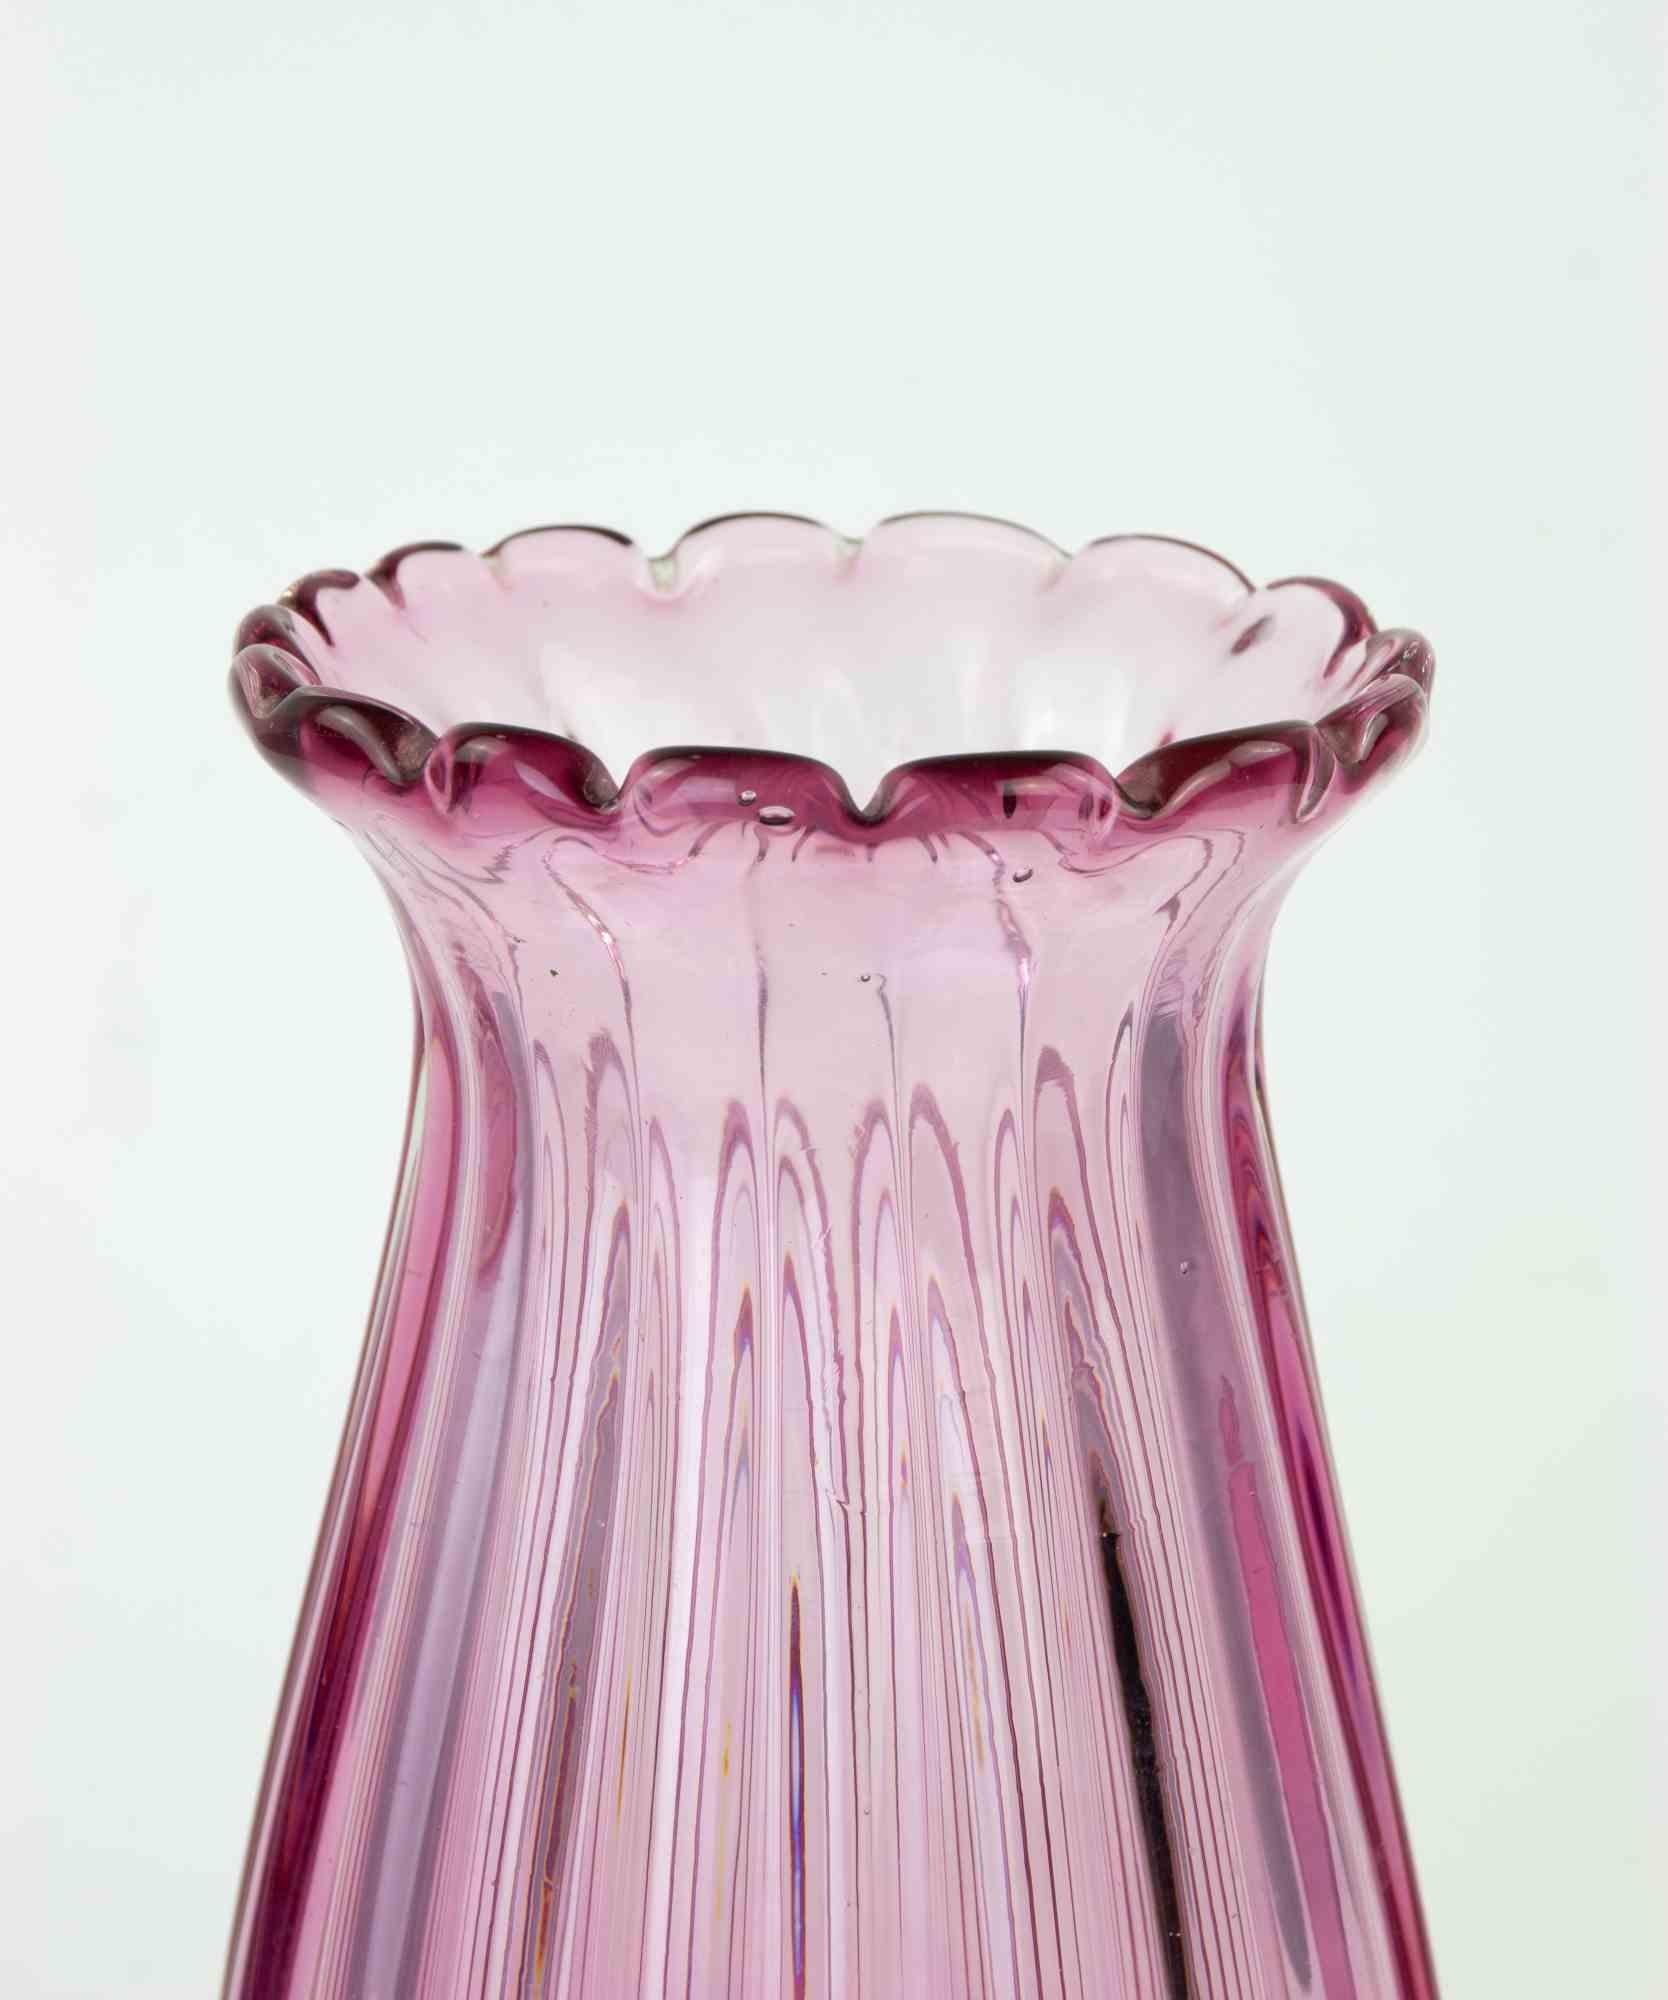 Pink Sommerso Ribbed Vase by Archimede Segusto in 1970s, Murano, Italy.